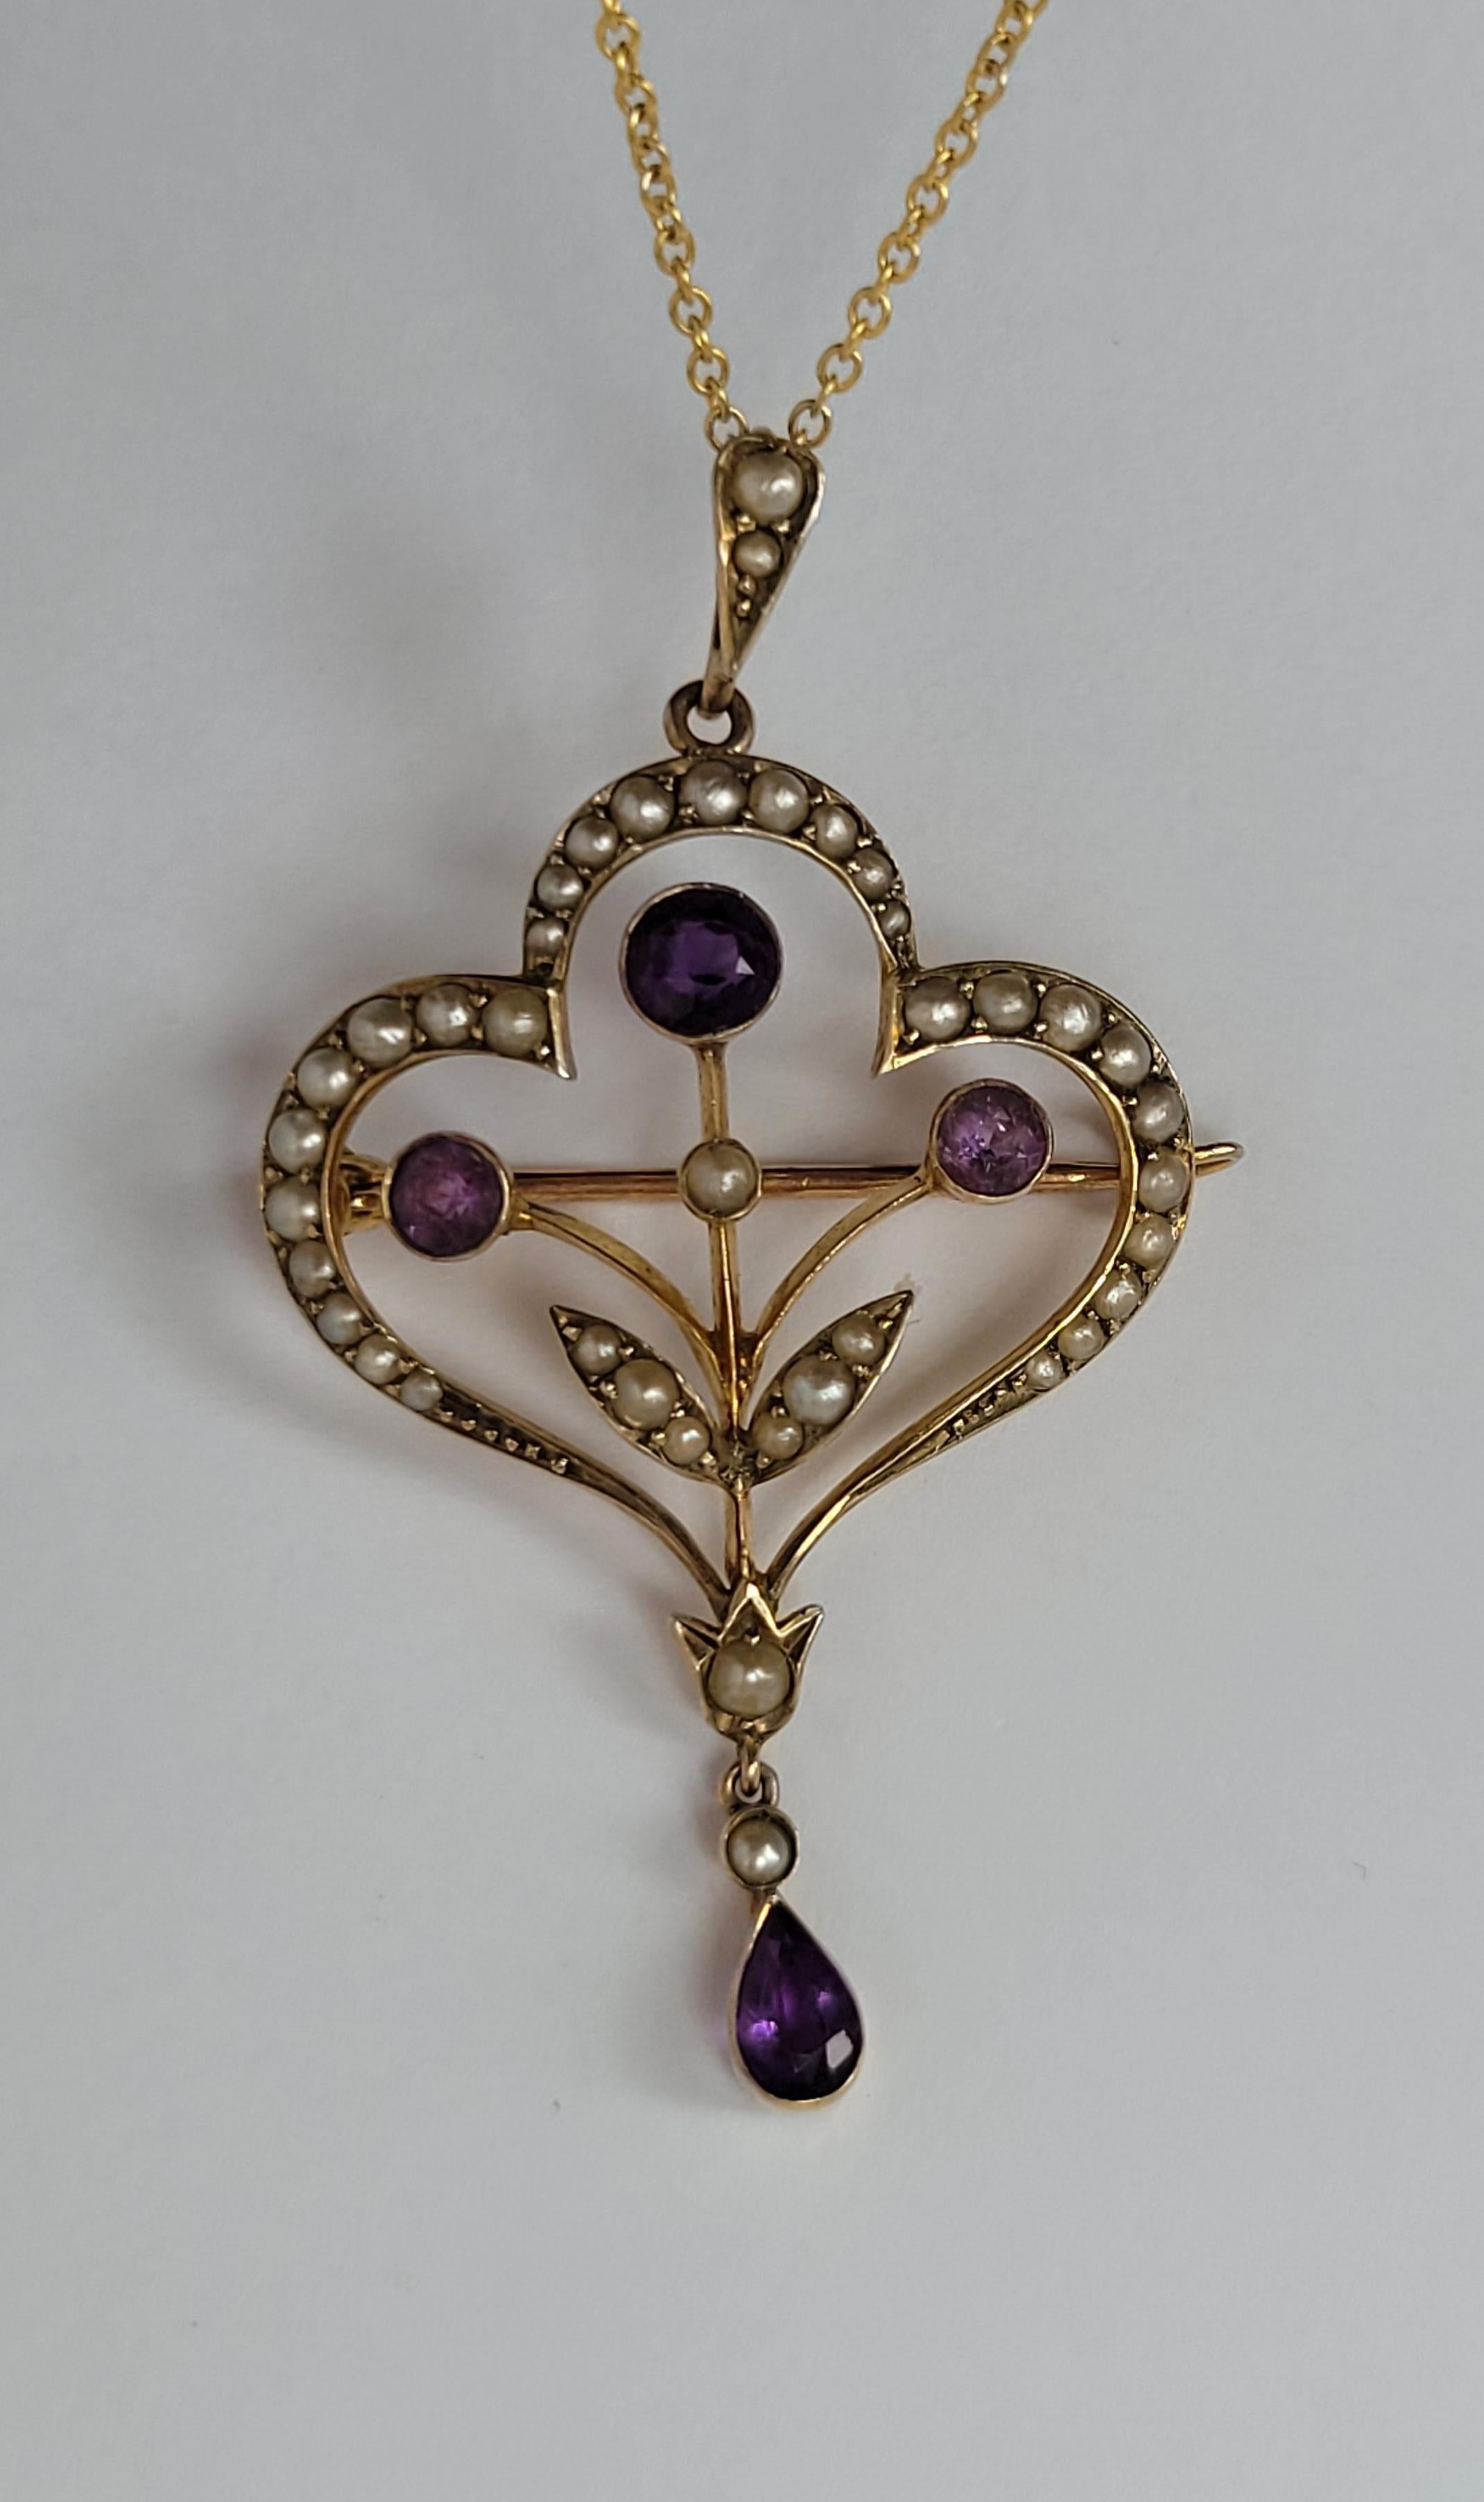 Antique Edwardian Amethyst Pearl Gold Brooch Pendant Necklace For Sale 7